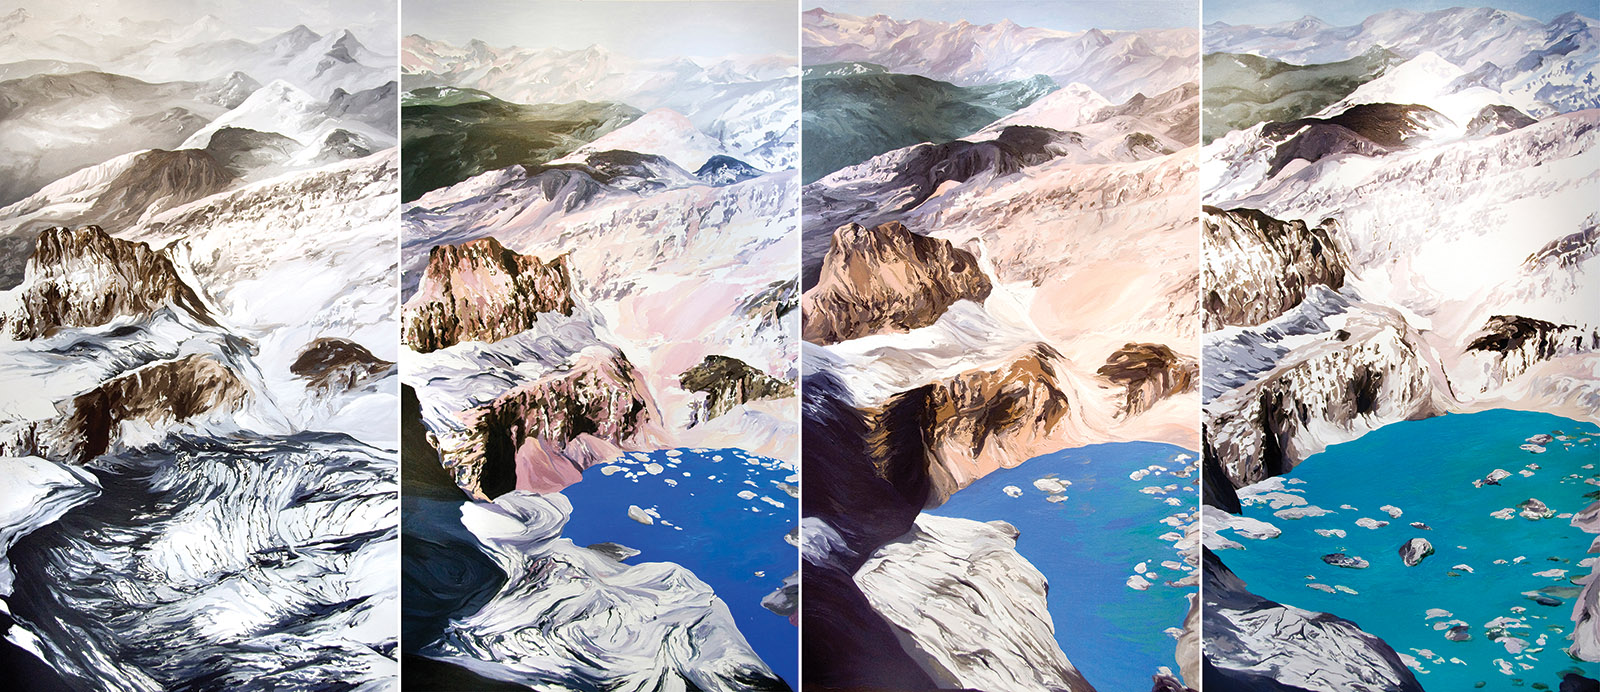 Diane Burko: Grinnell Mt. Gould #1, #2, #3, #4, 2009; based on USGS photos of Grinnell Glacier at Glacier National Park, Montana, between 1938 and 2006. Burko’s work is on view in ‘Endangered: From Glaciers to Reefs,’ at the National Academy of Sciences, Washington, D.C., until January 31, 2019. The accompanying book is published by KMW Studio.